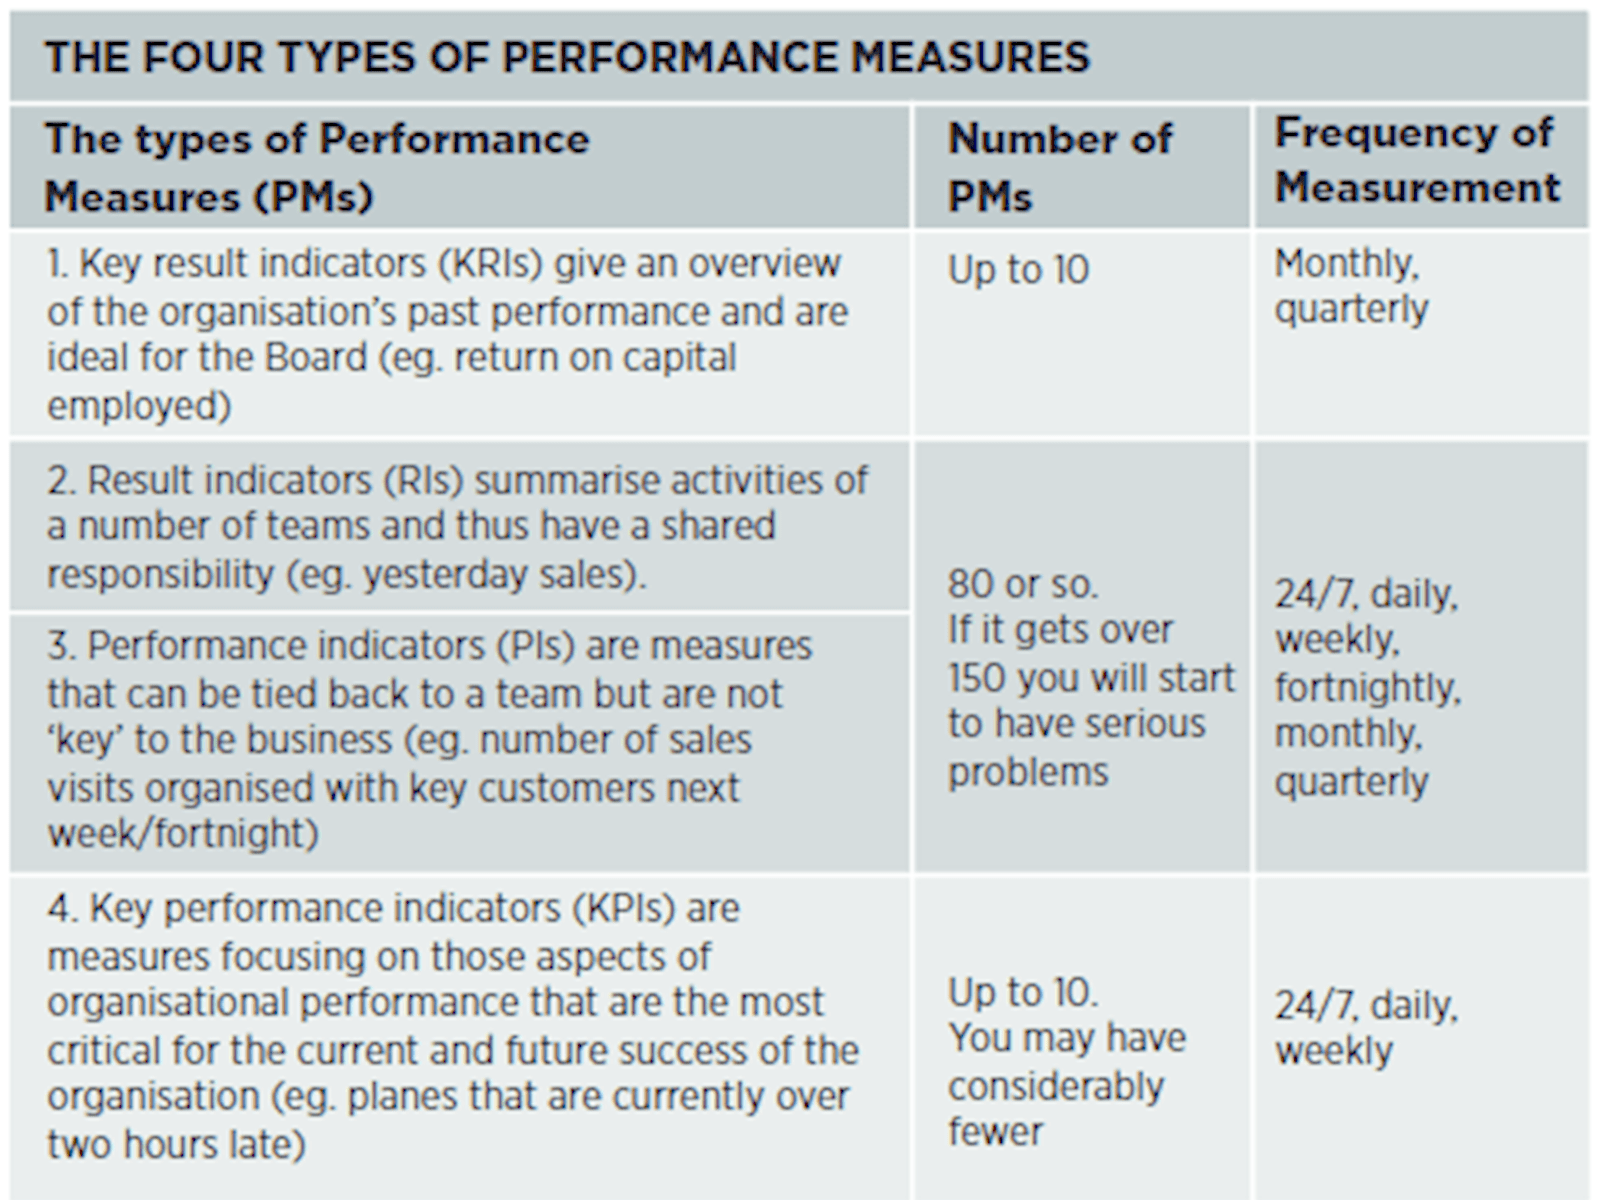 Figure 1: The four types of performance measures